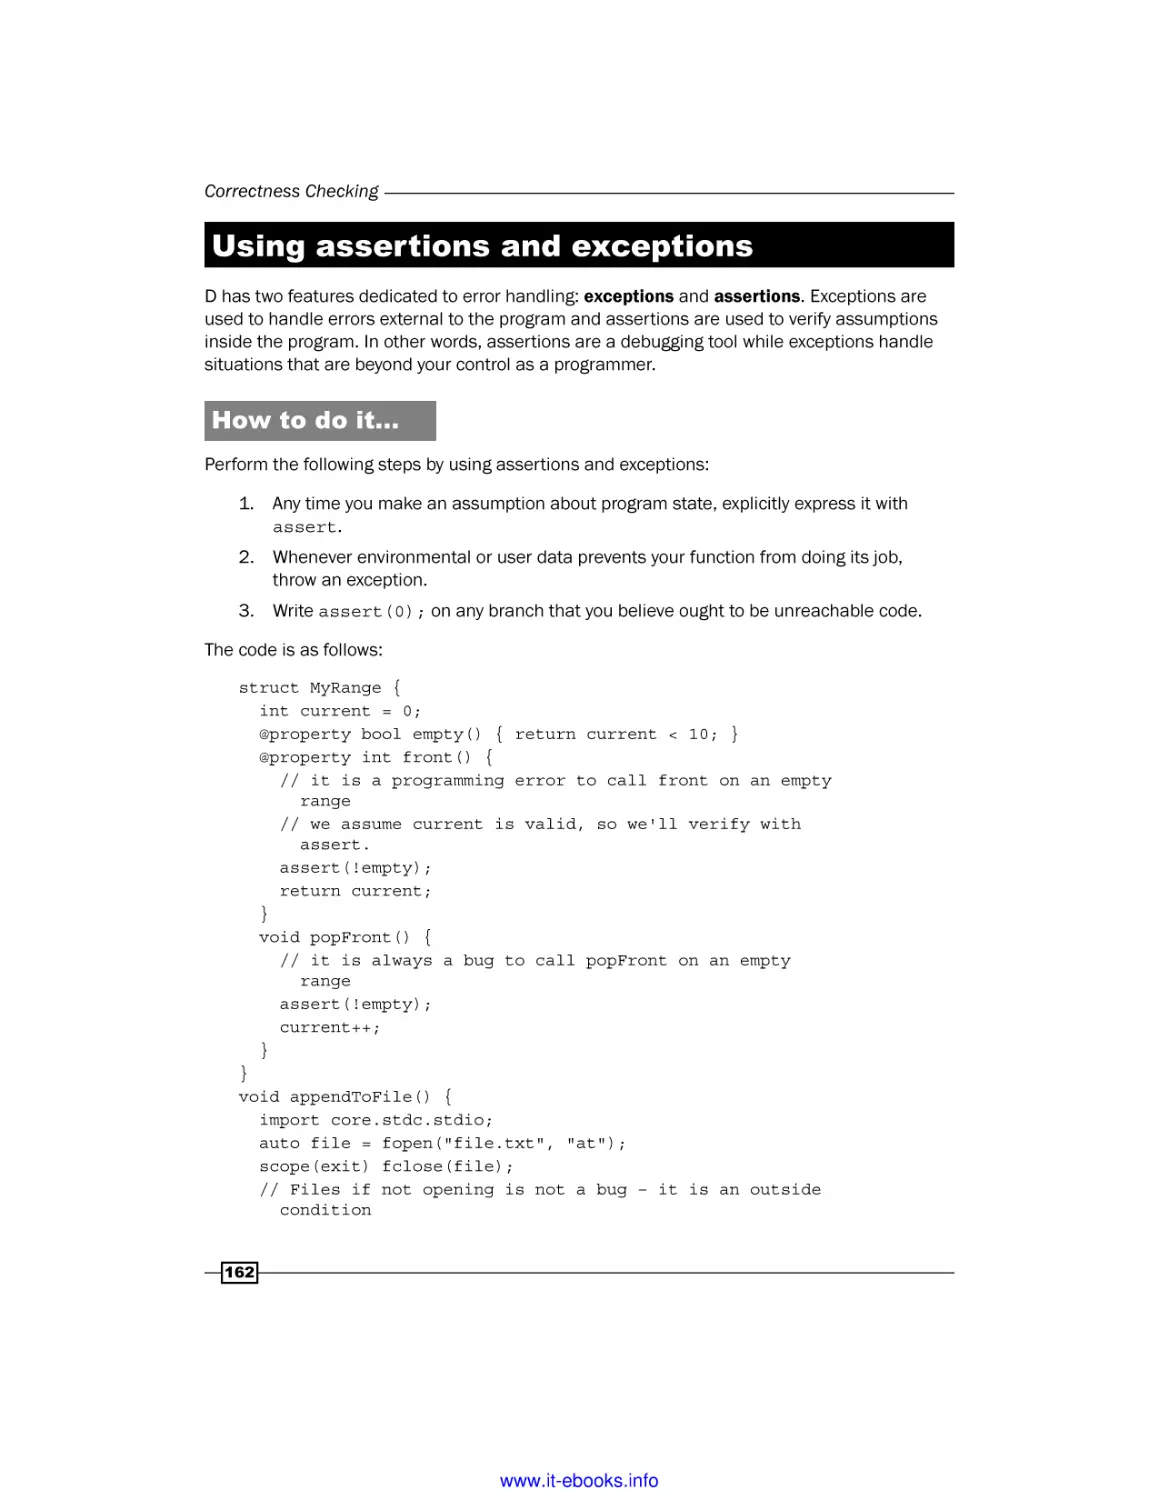 Using assertions and exceptions